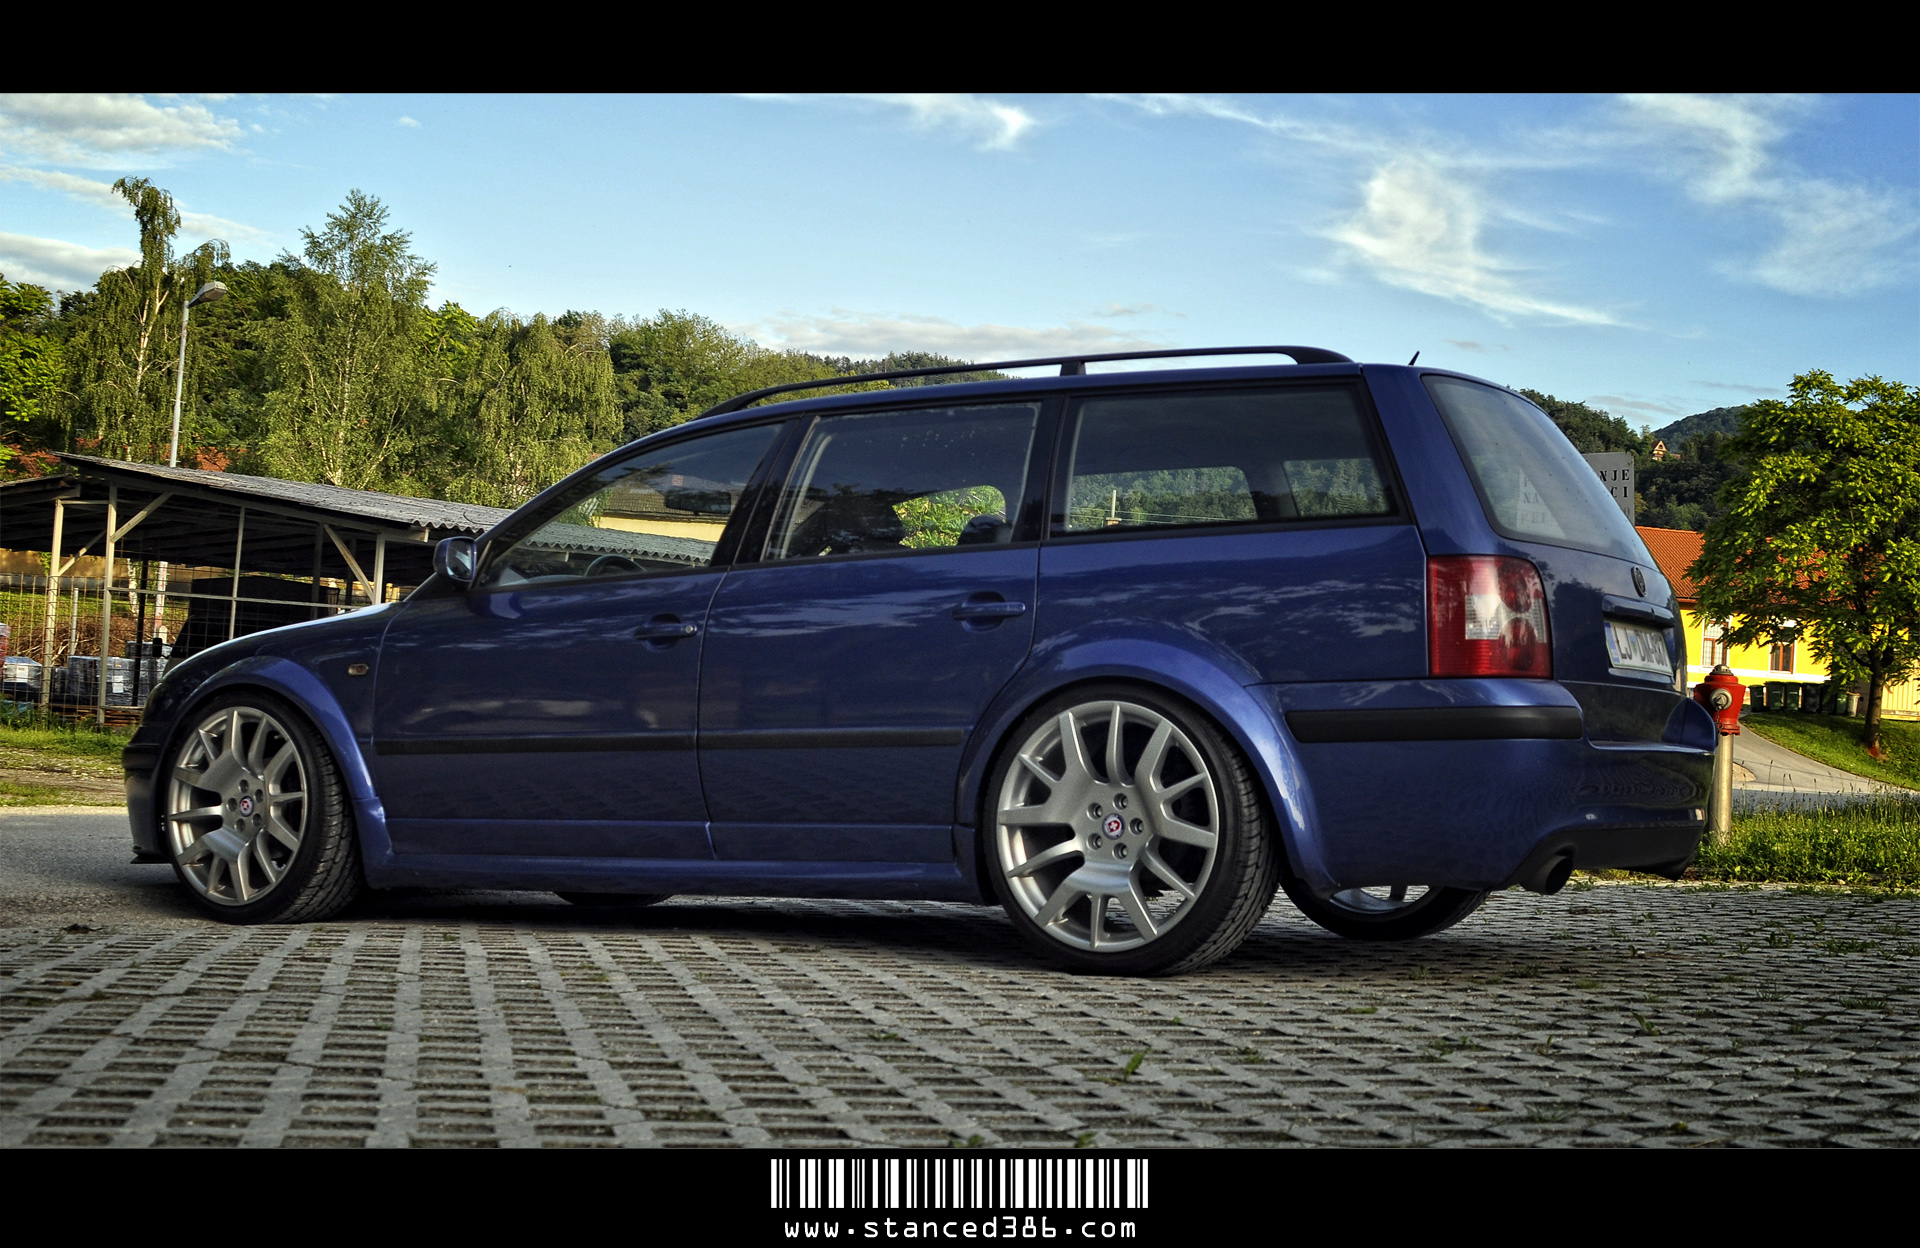 VW Passat B5 3b Bagged on 3SDM Rims Before and After by Dave 